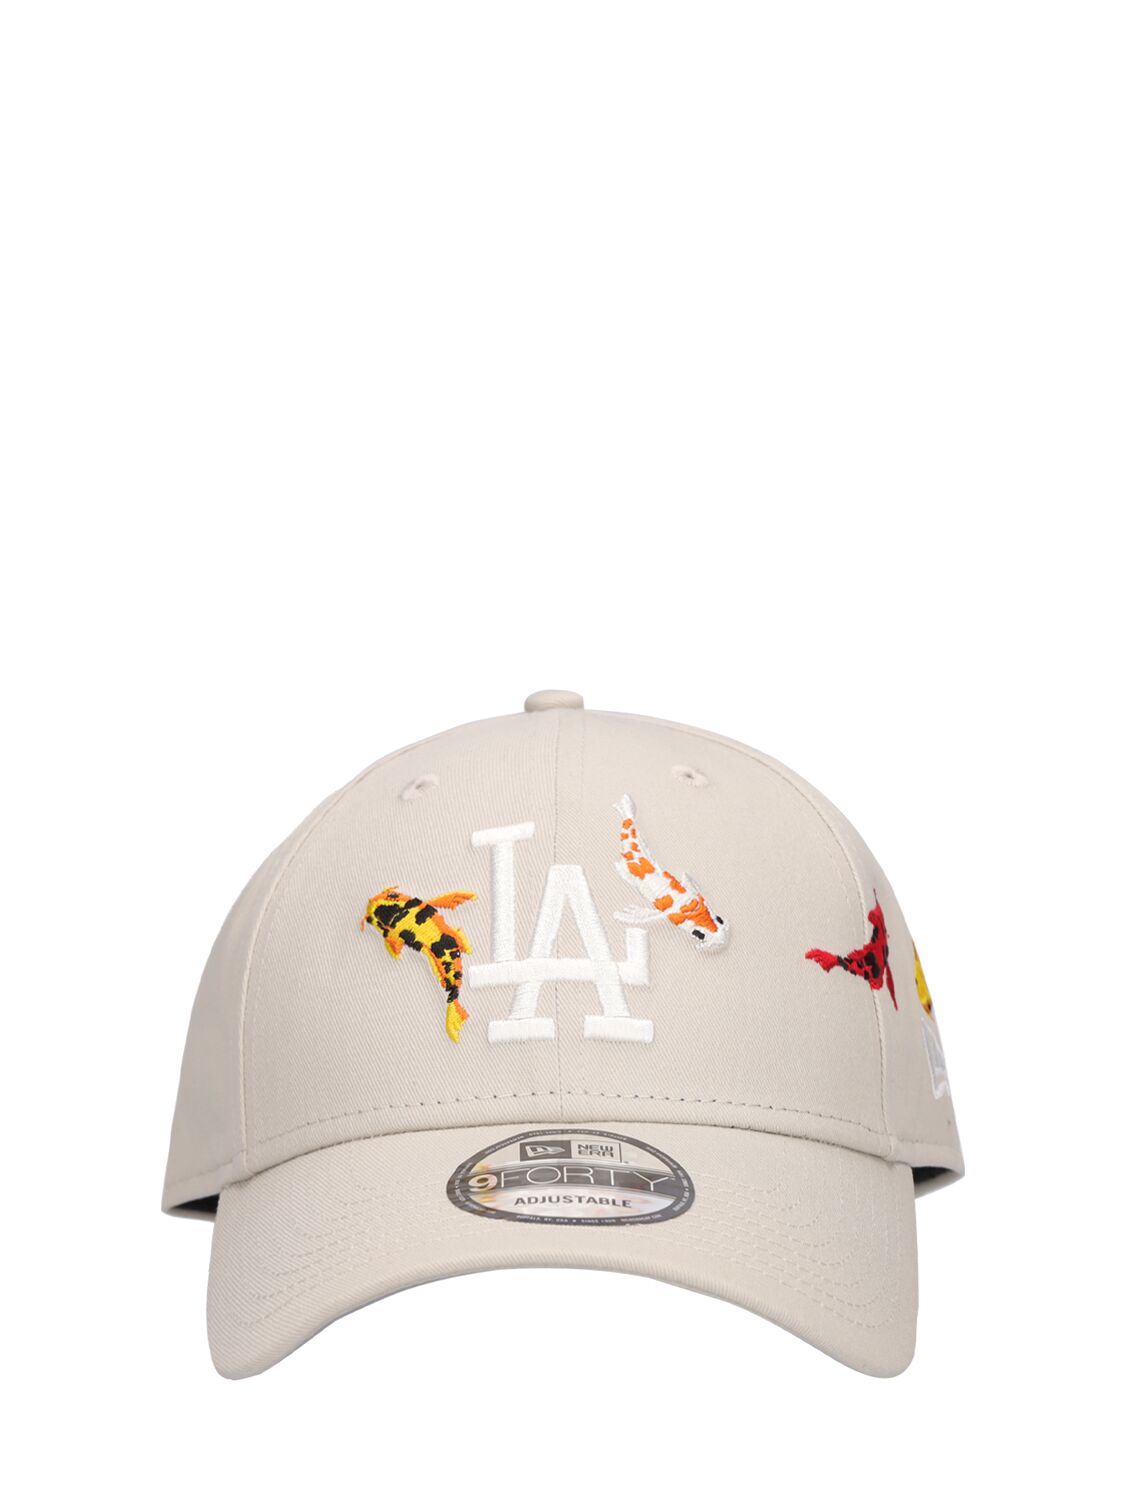 Los Angeles Angels New Era Chrome Rogue 59FIFTY Fitted Hat - White/Pink